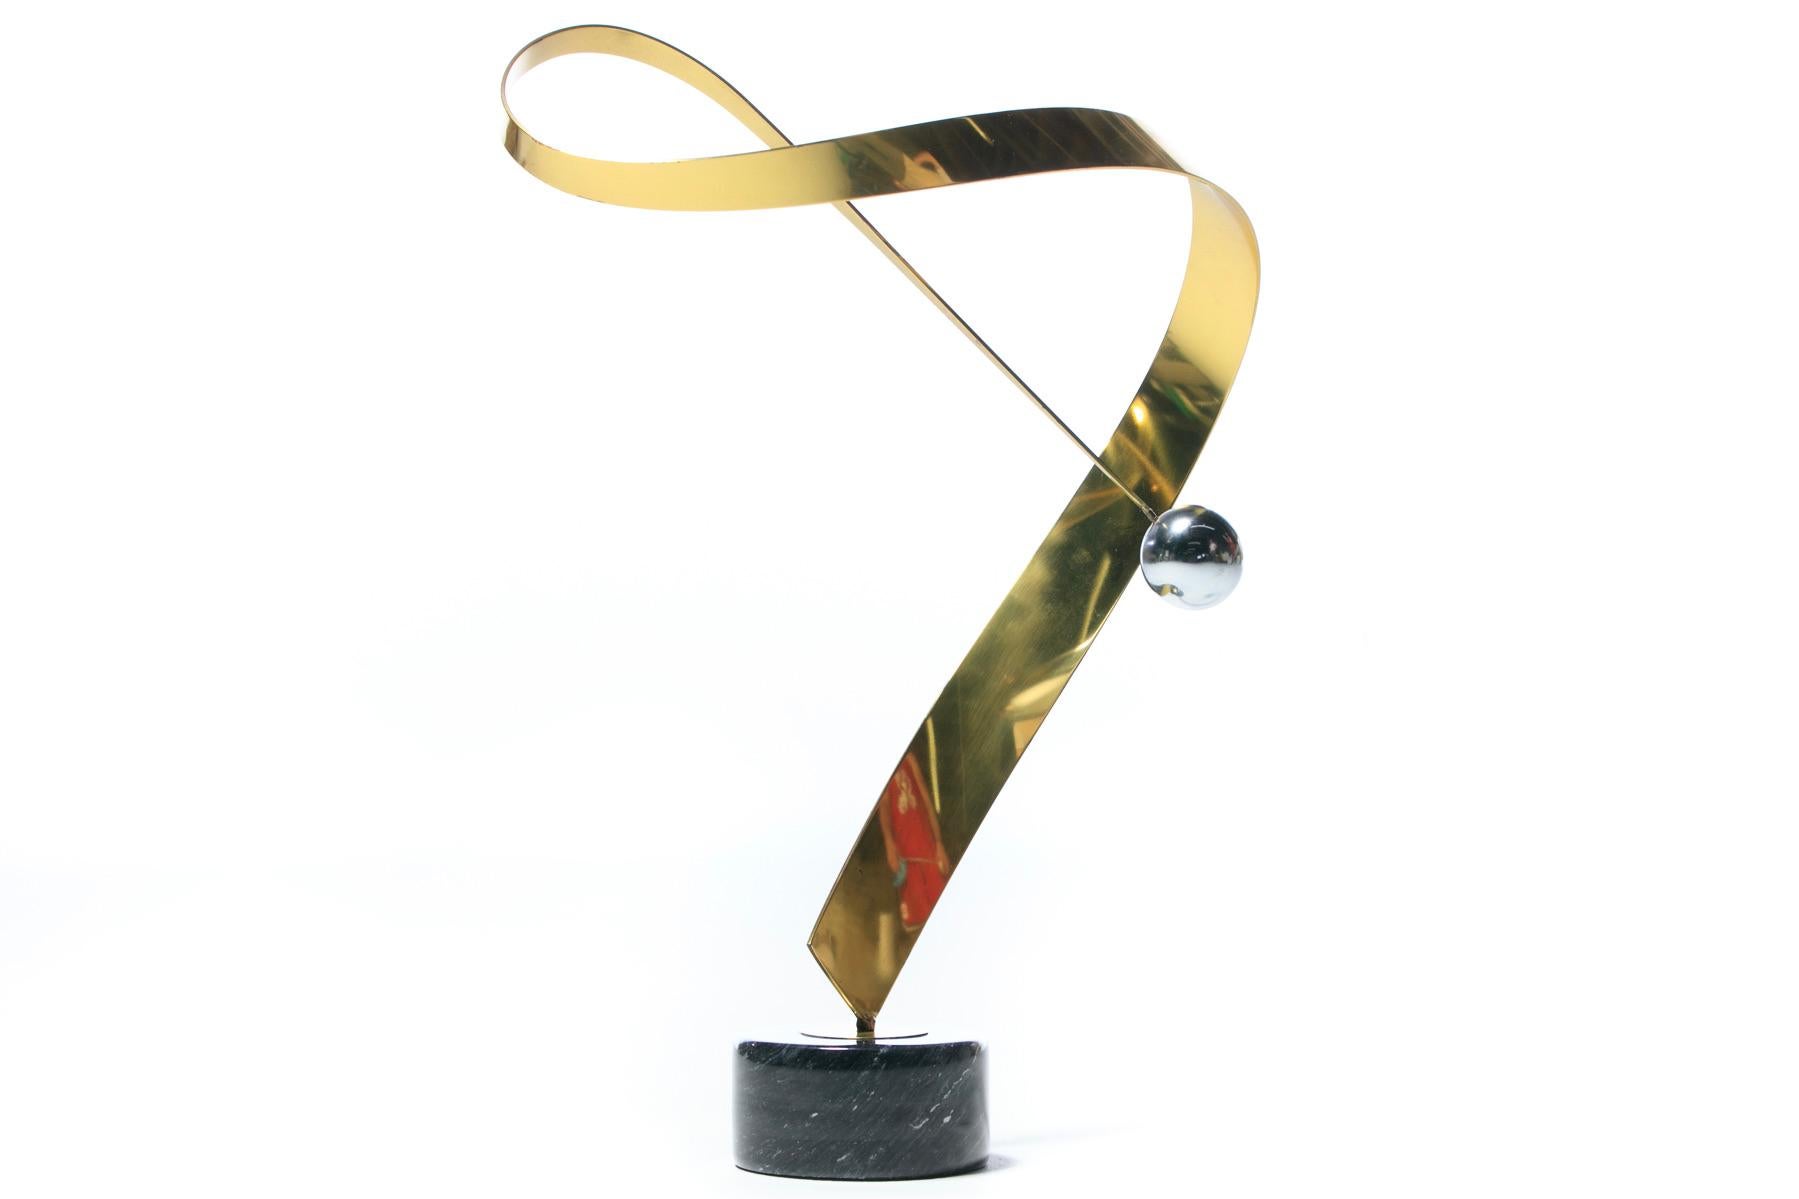 Post-Modern Curtis Jere Post Modern Table Sculpture of Brass Chrome and Marble c. 1985 For Sale